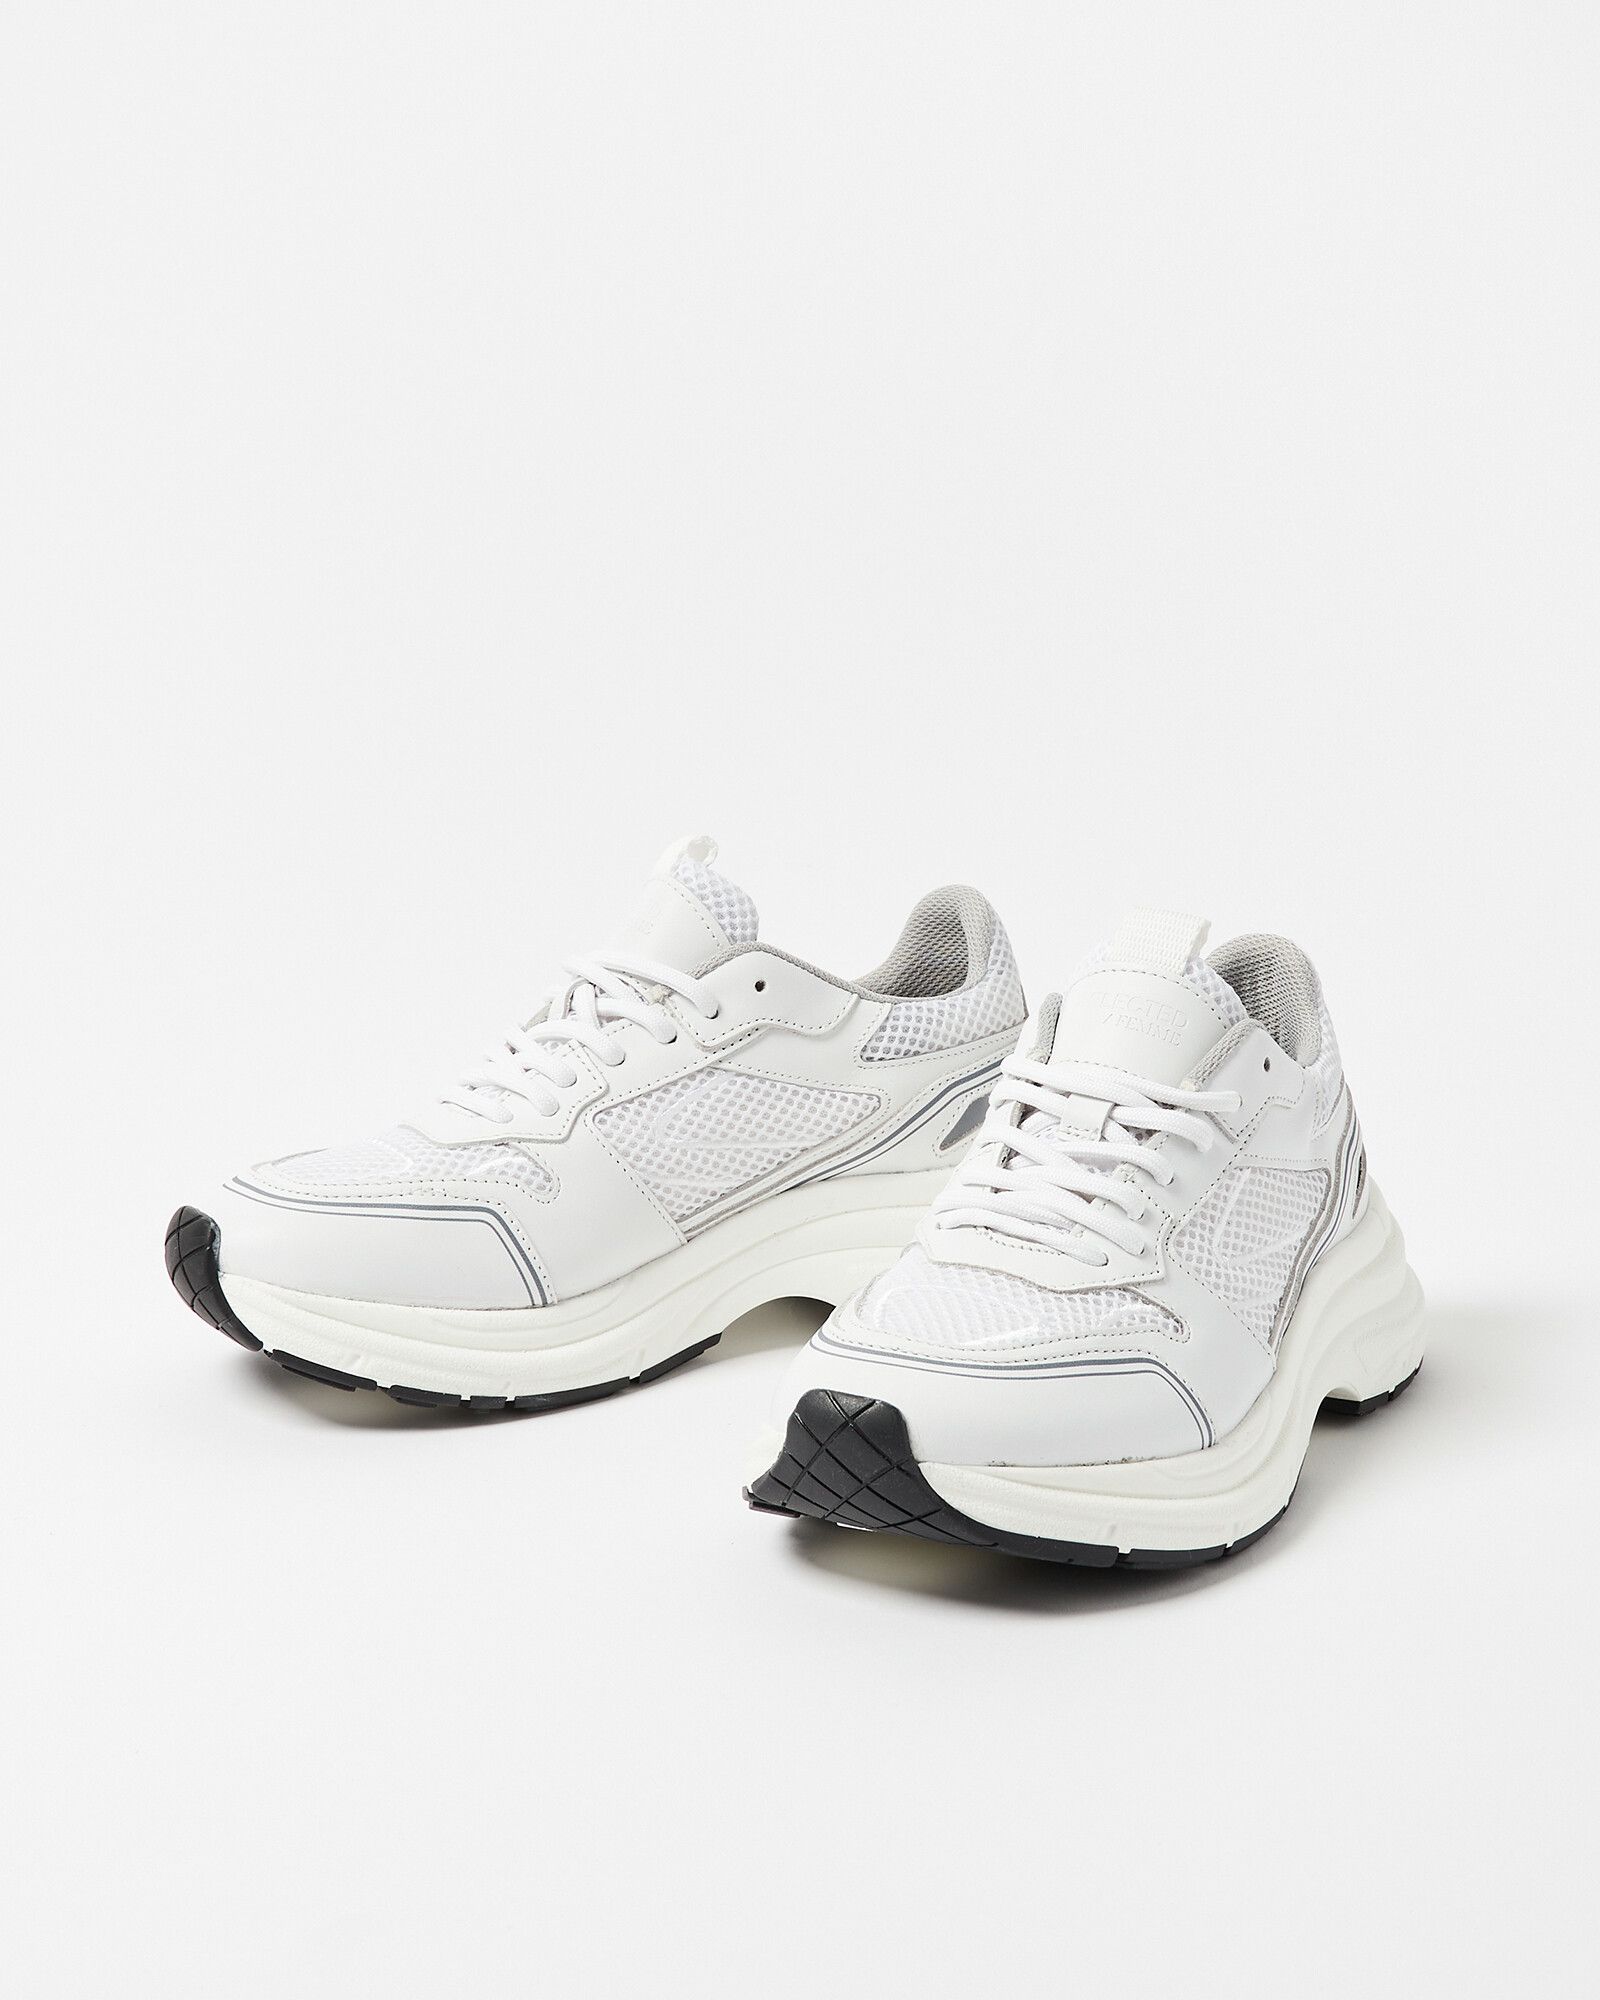 Selected Femme Abby Chunky White Trainers | Oliver Bonas